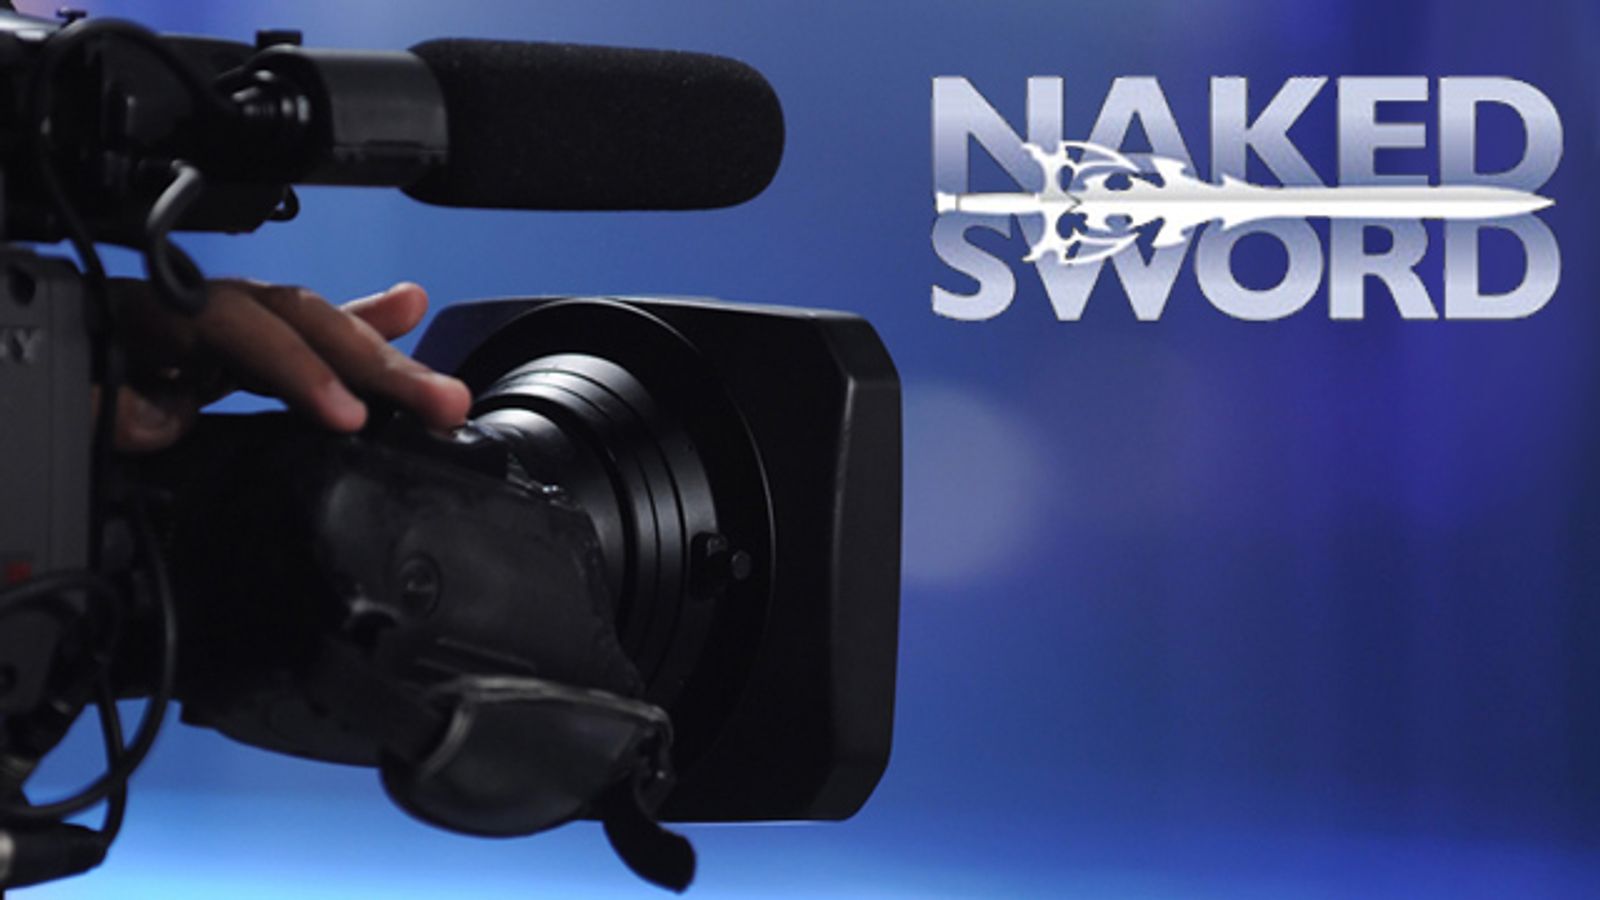 NakedSword Expands Behind-the-Scenes Productions